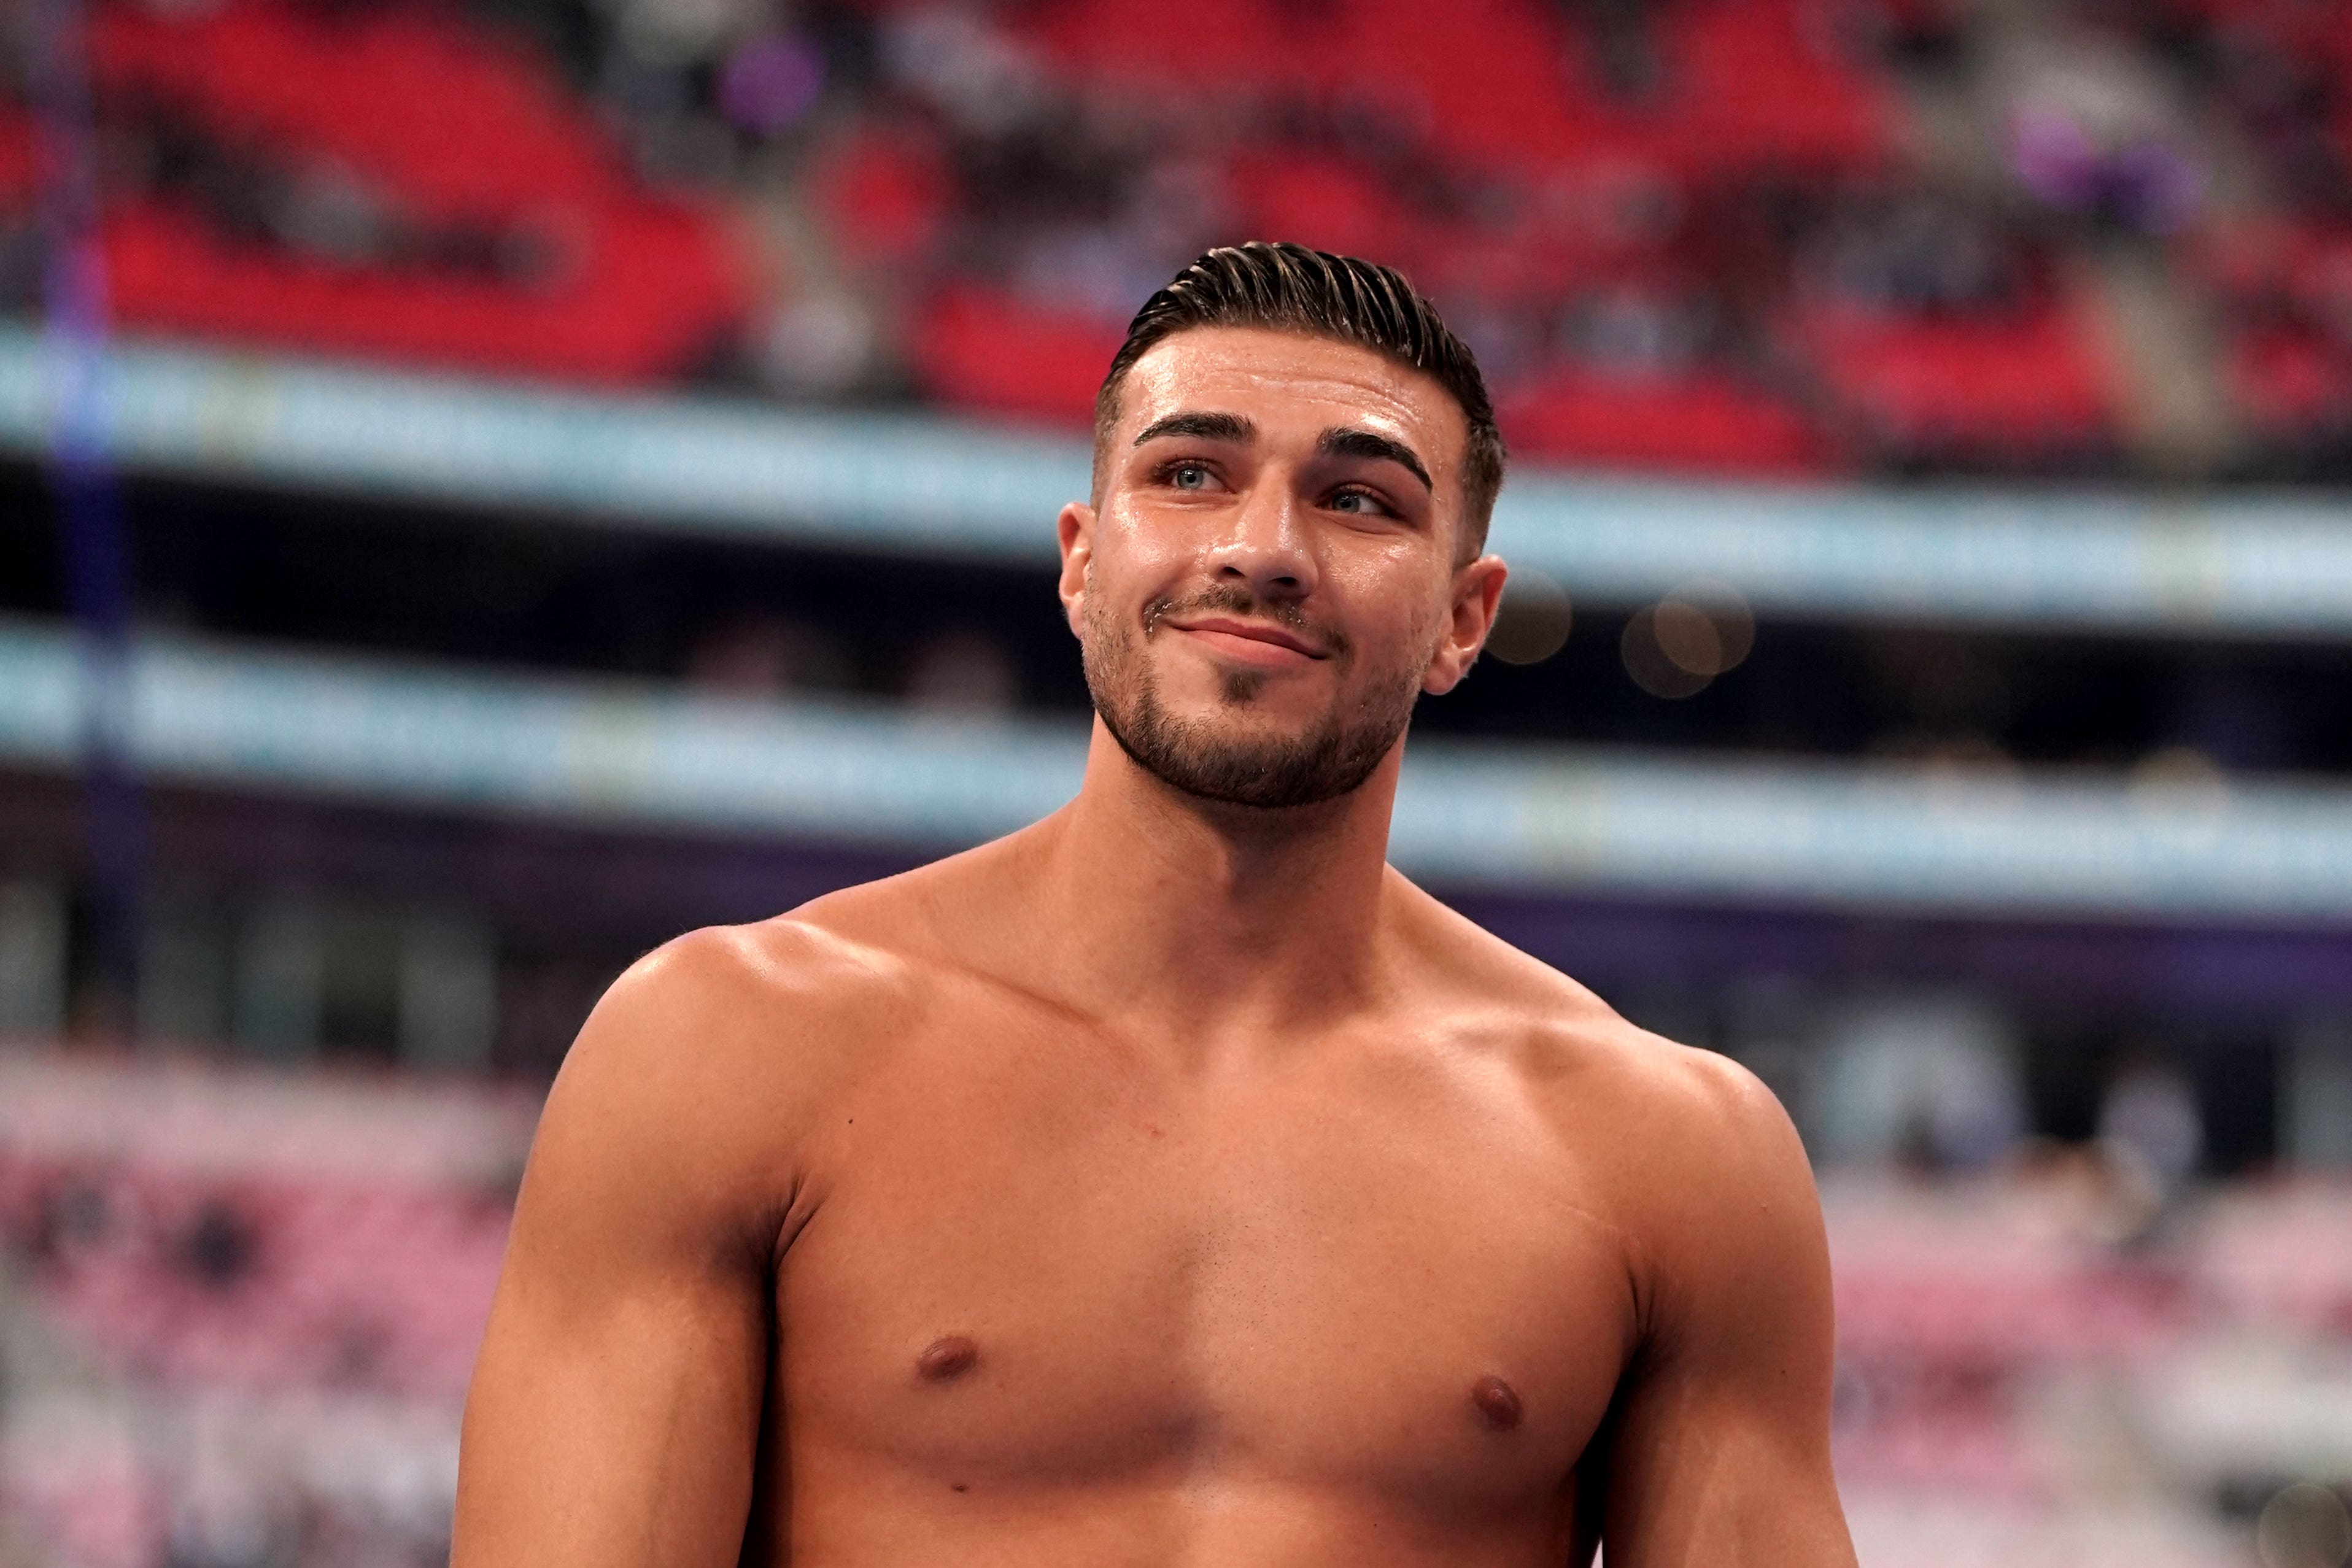 How much money did Tommy Fury make from KSI fight?